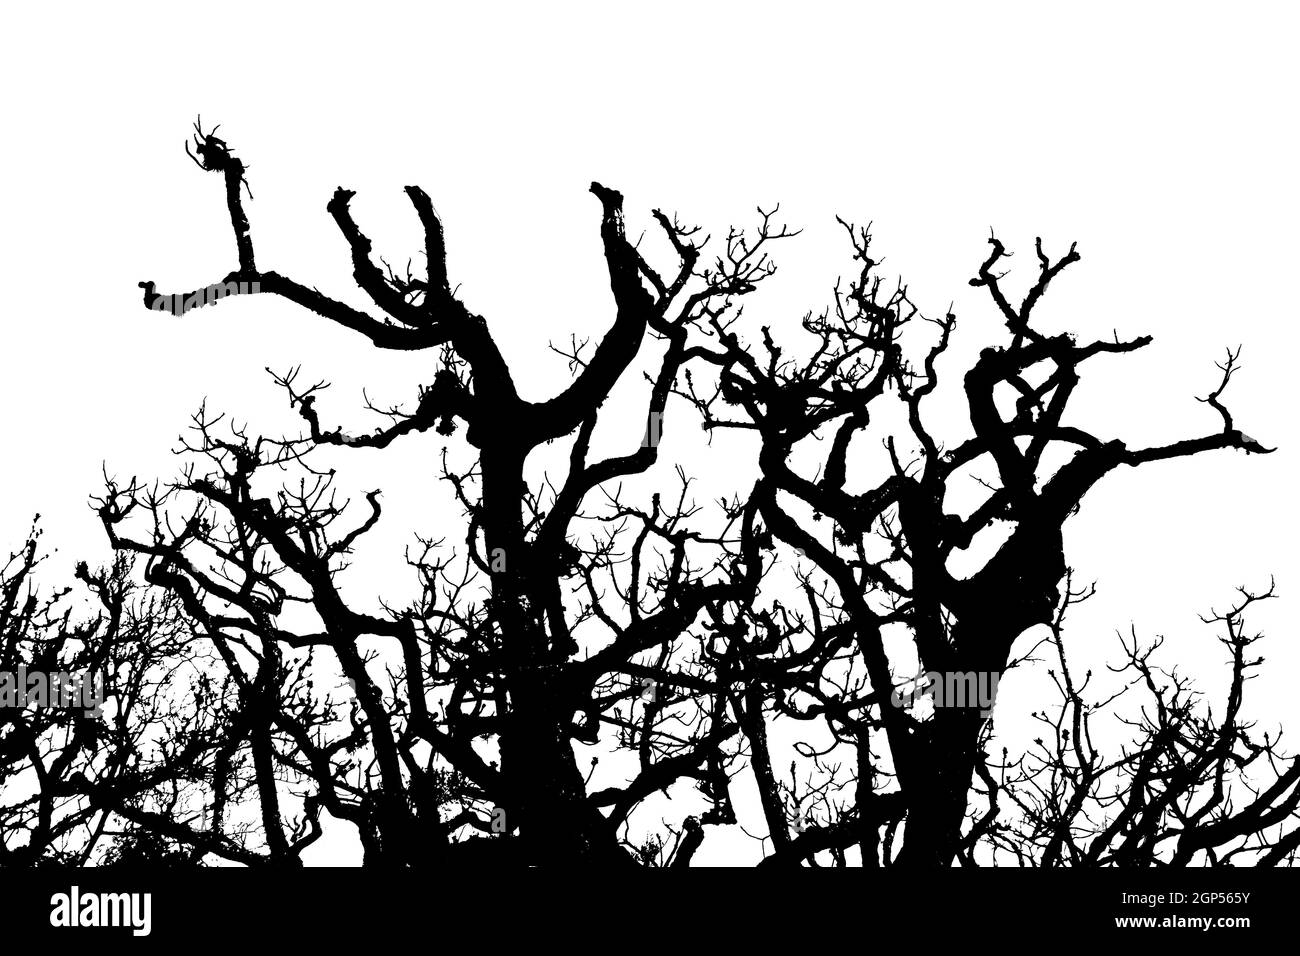 Ombu trees graphic silhouette isolated on white backgroud Stock Photo